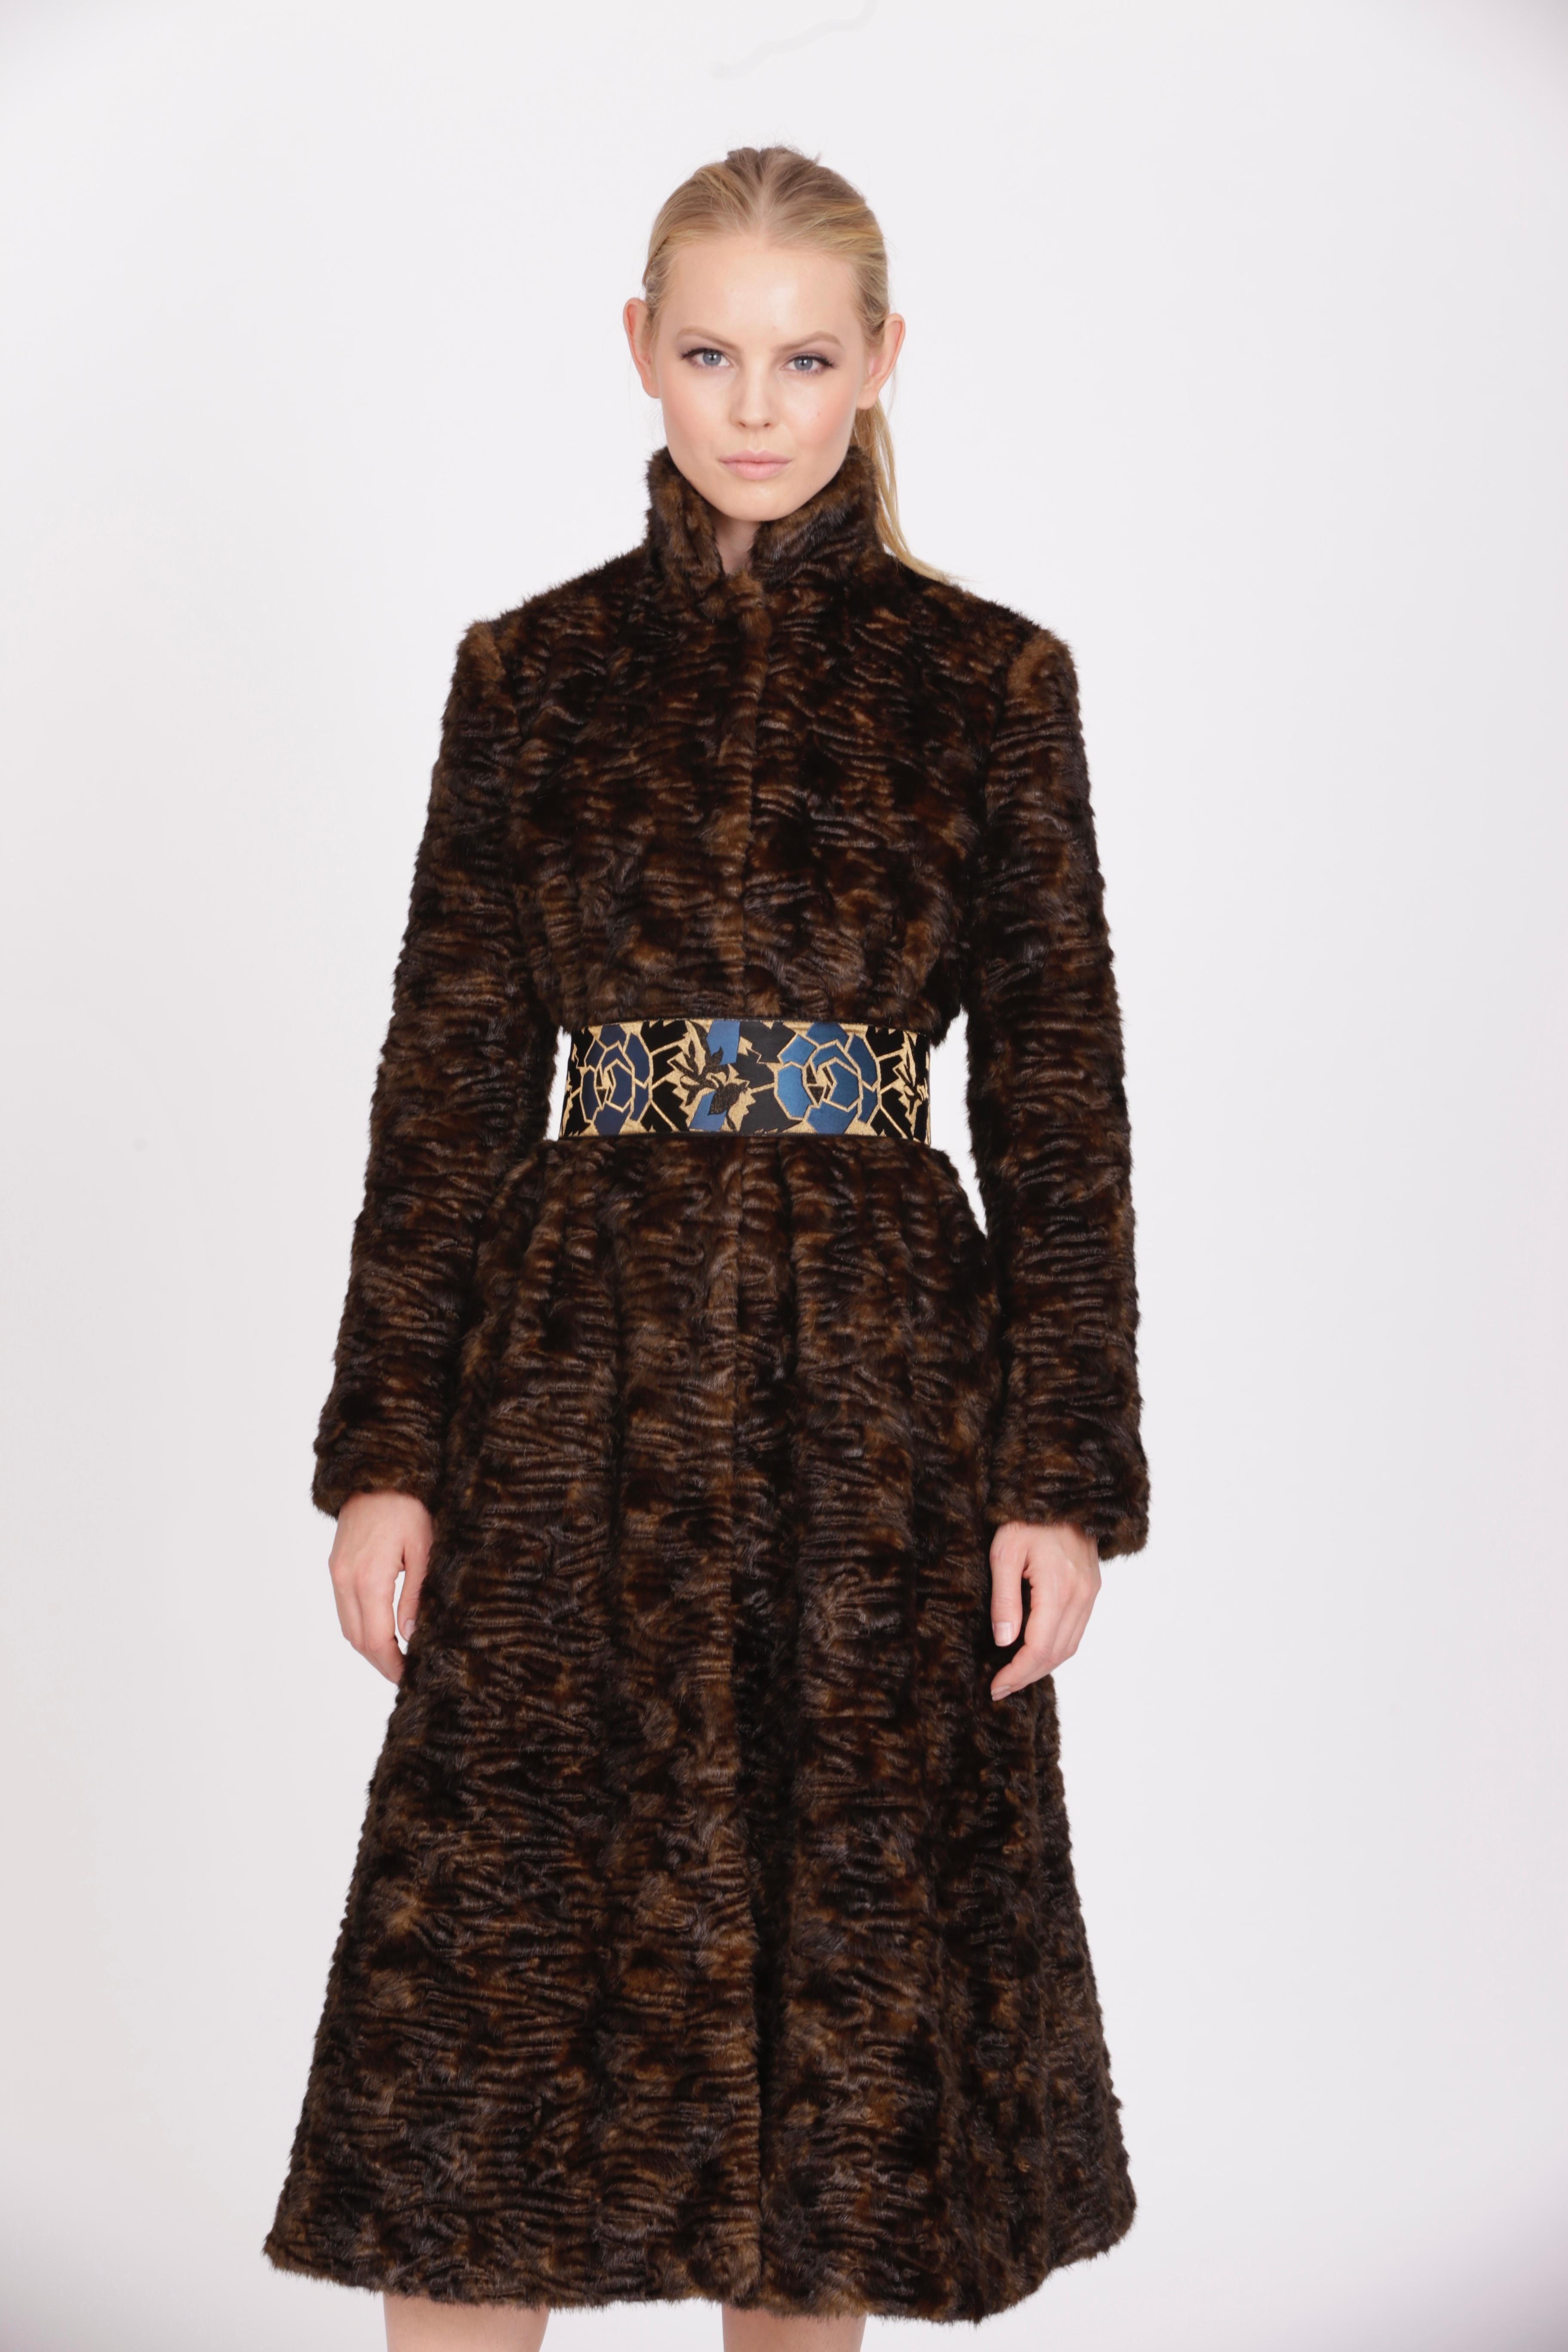 The Marissa Pelush Astrakhan faux fur coat is a one of a kind exclusive piece. Featuring the highest quality man made pelage, this stylish and warm fake fur coat is a beautiful replica of the Persian lamb fur. The Princess cut design highlights the